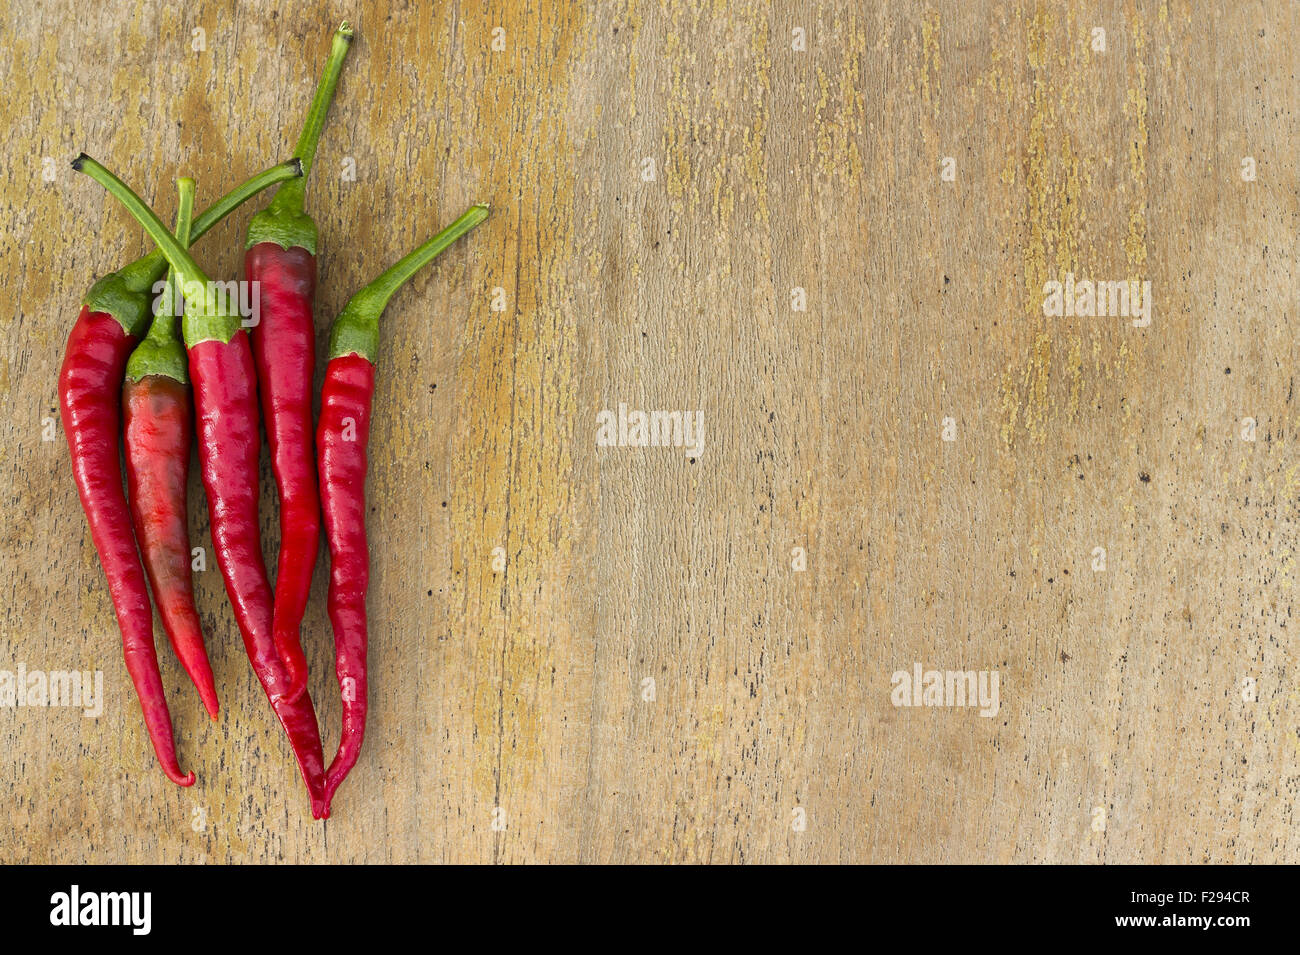 Hot chilly peppers Stock Photo